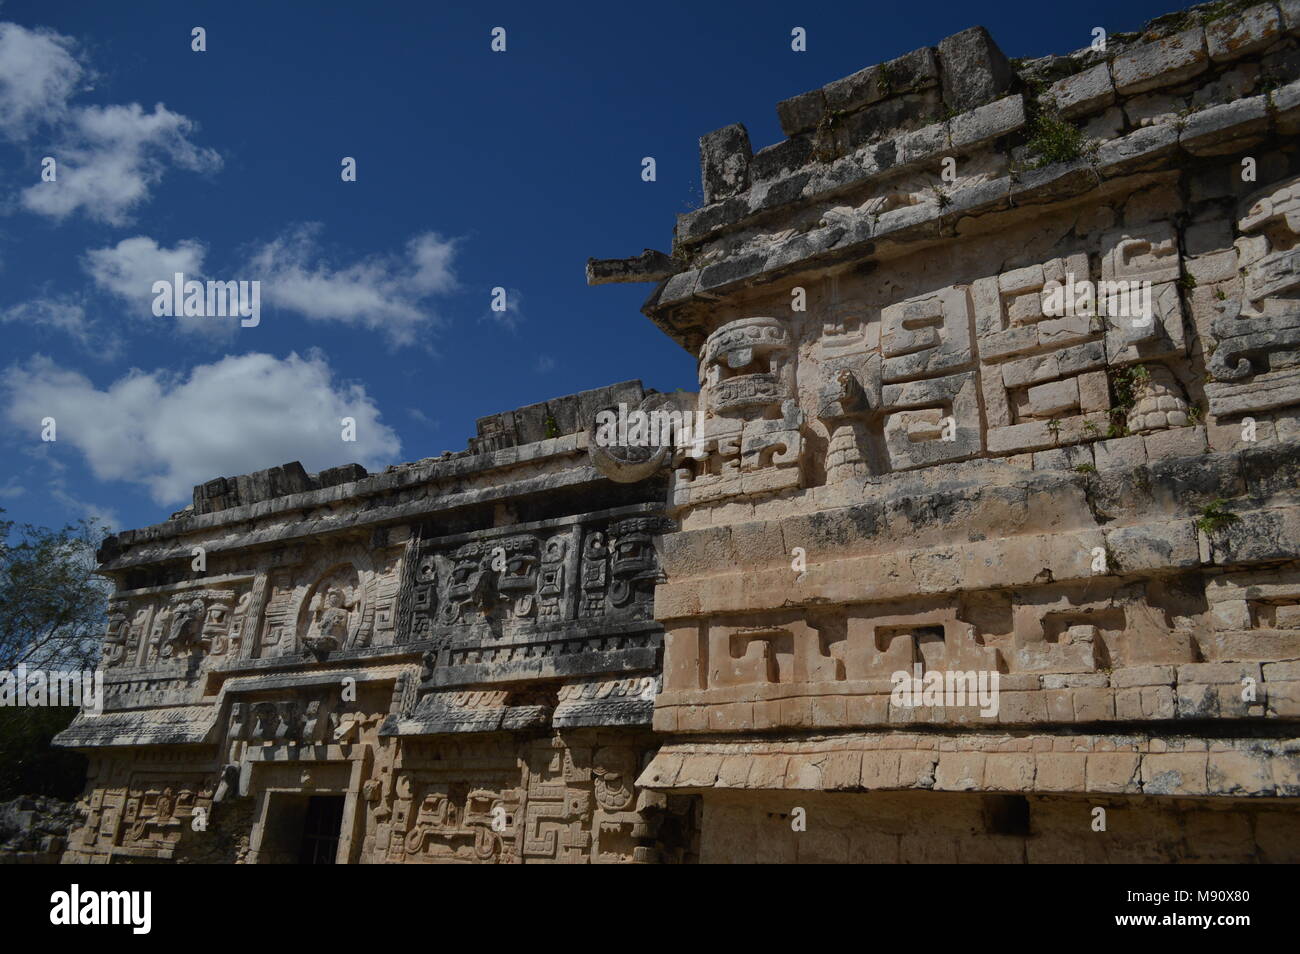 Carvings of Mayan buildings in Chichen Itza, Mexico Stock Photo